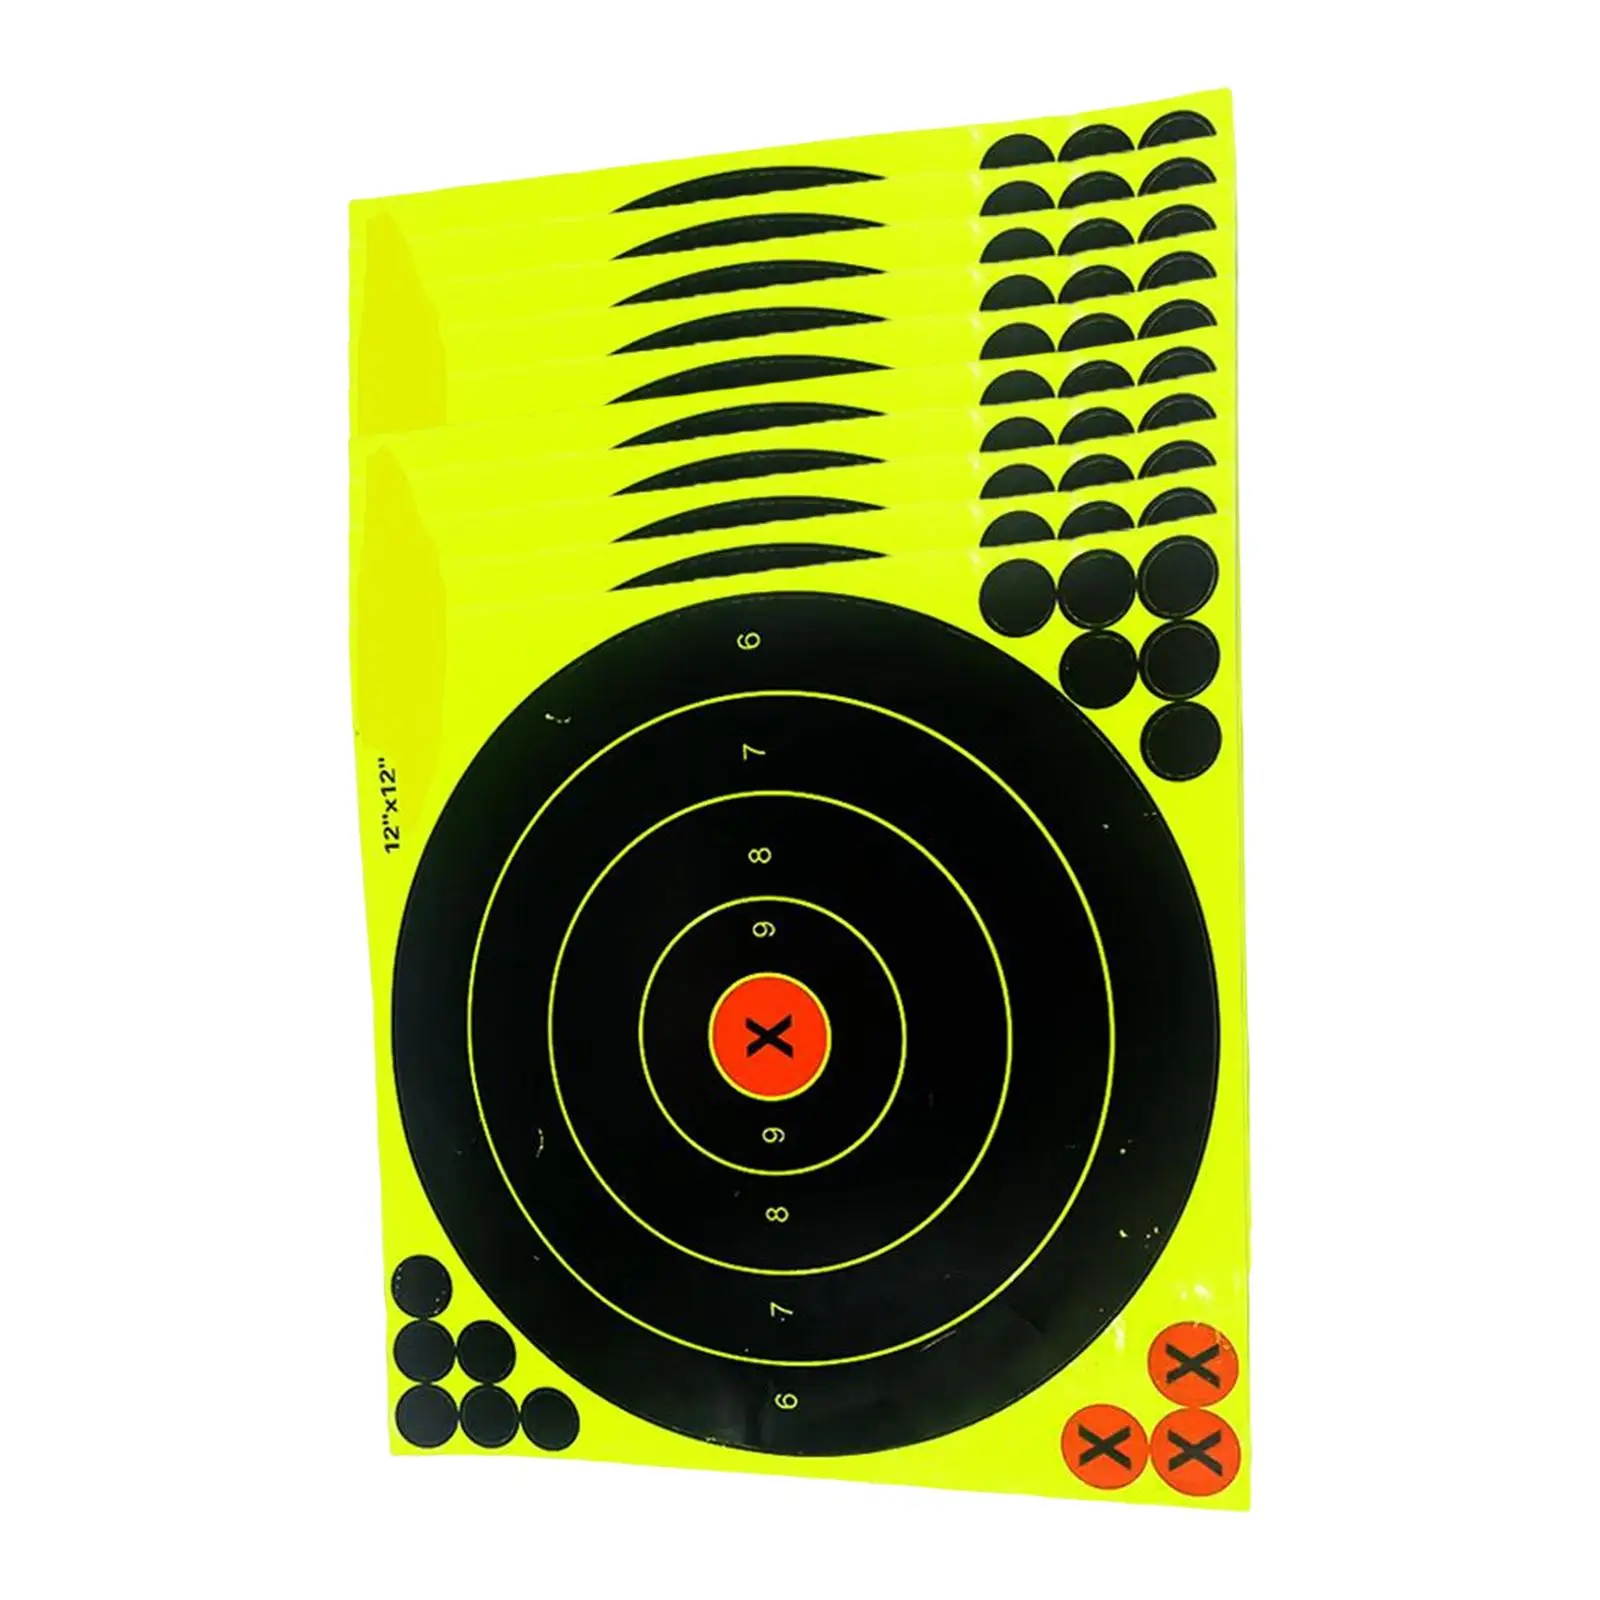 10Pcs 12inch Shooting Targets Splatter Reactive Paper Sticker Self Adhesive High Visibility Paper Target for Garden Practice Bow